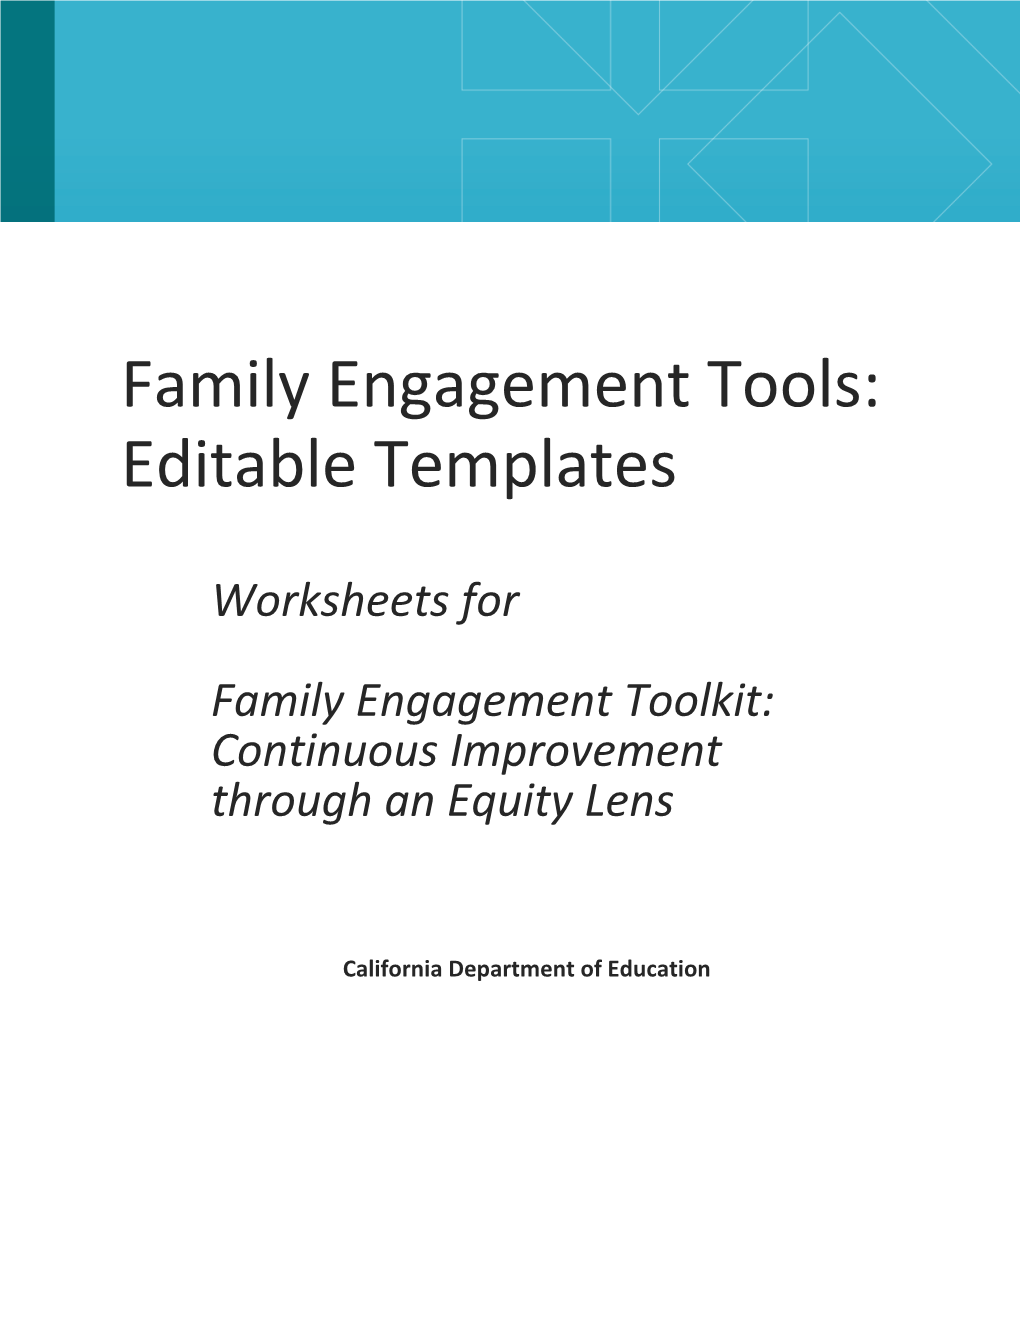 Family Engagement Tools - LCFF (CA Dept of Education)